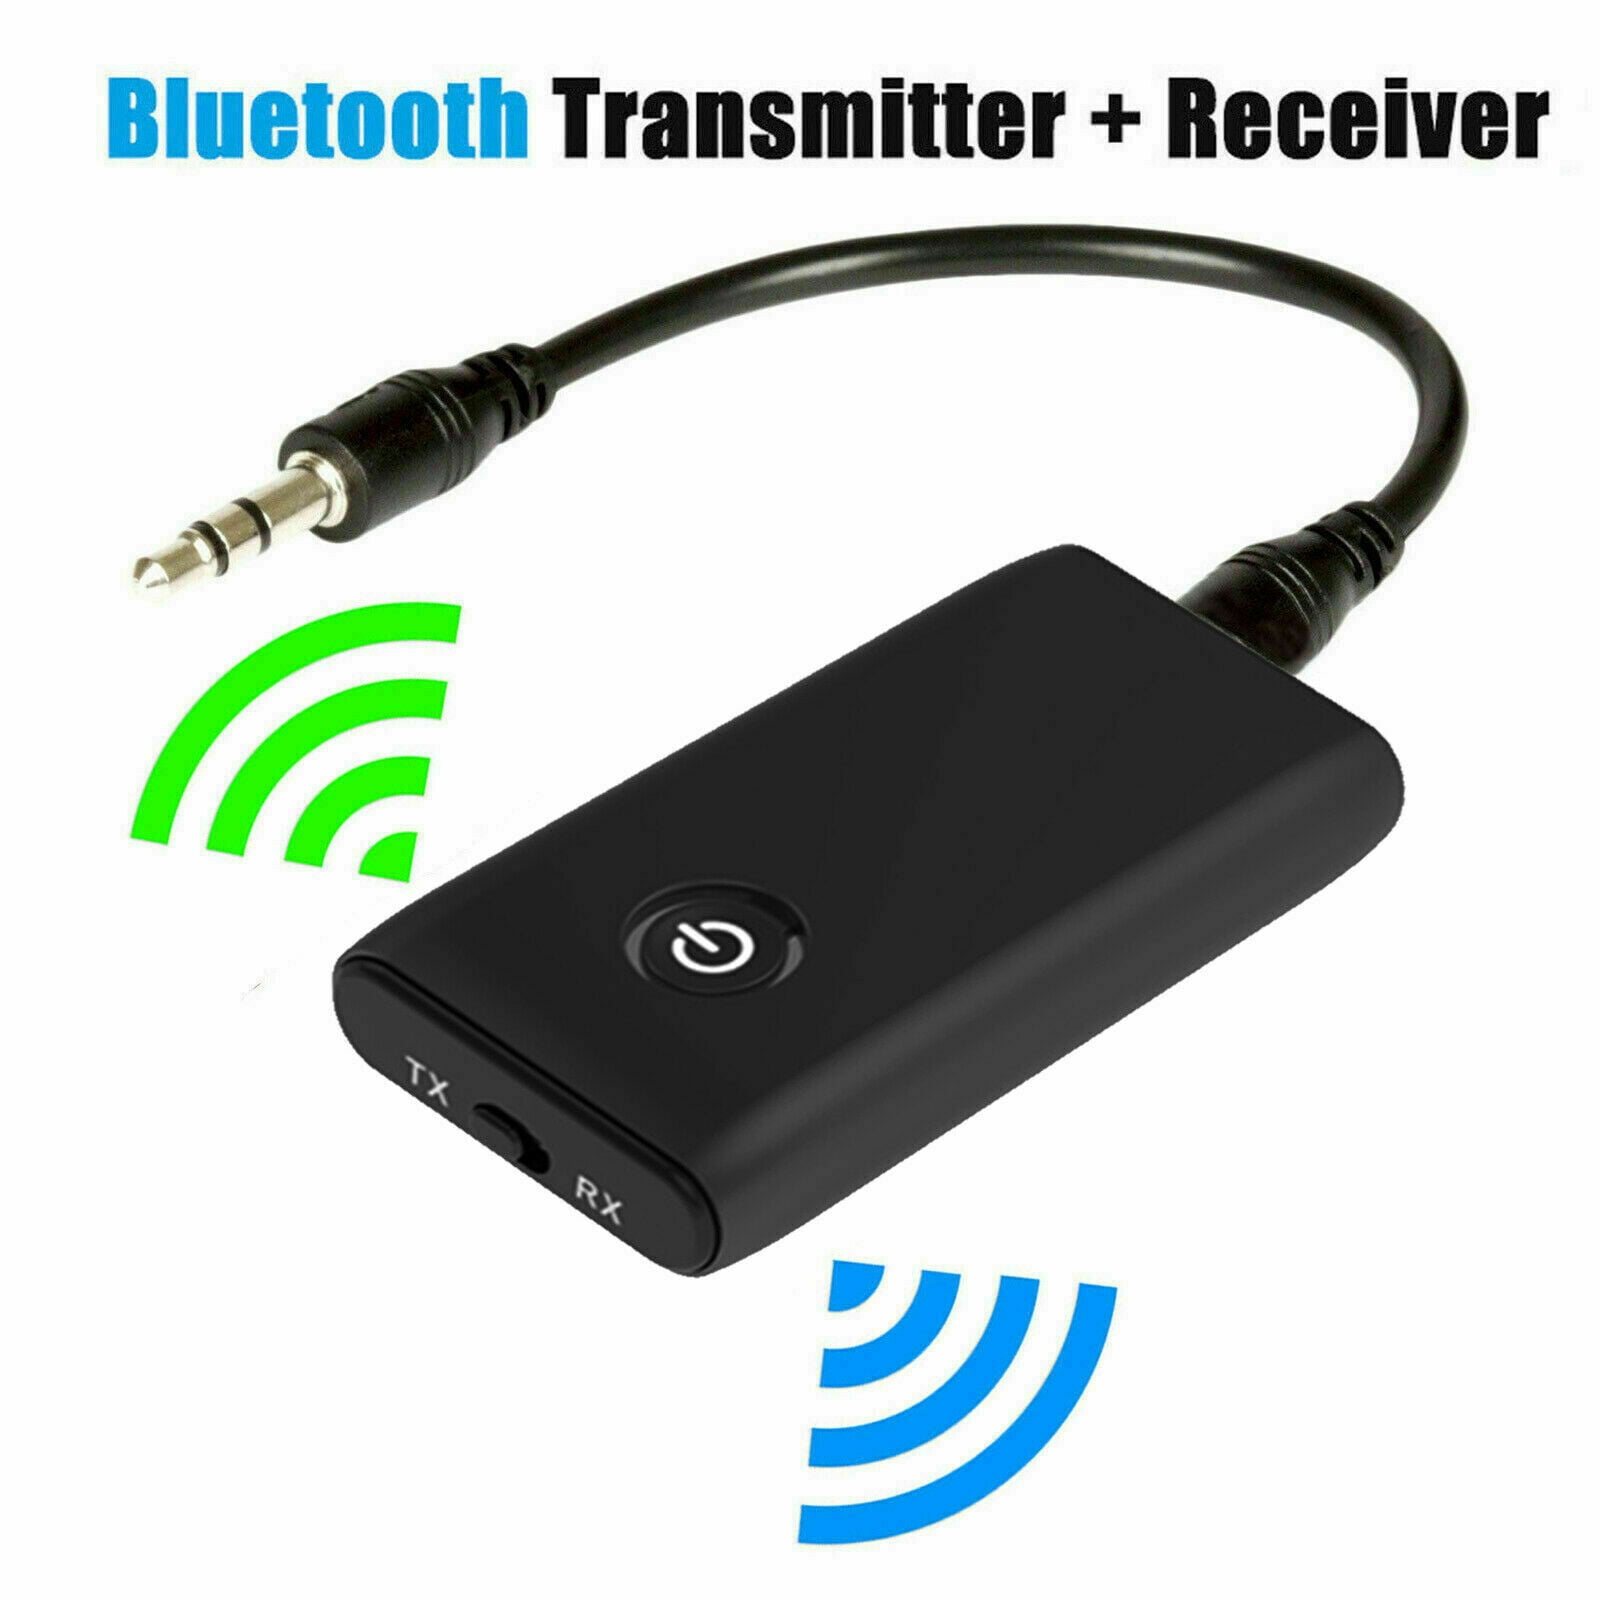 Wireless Bluetooth Audio Transmitter+Receiver 2 in 1 Bluetooth Adapter 3.5mm AUX 